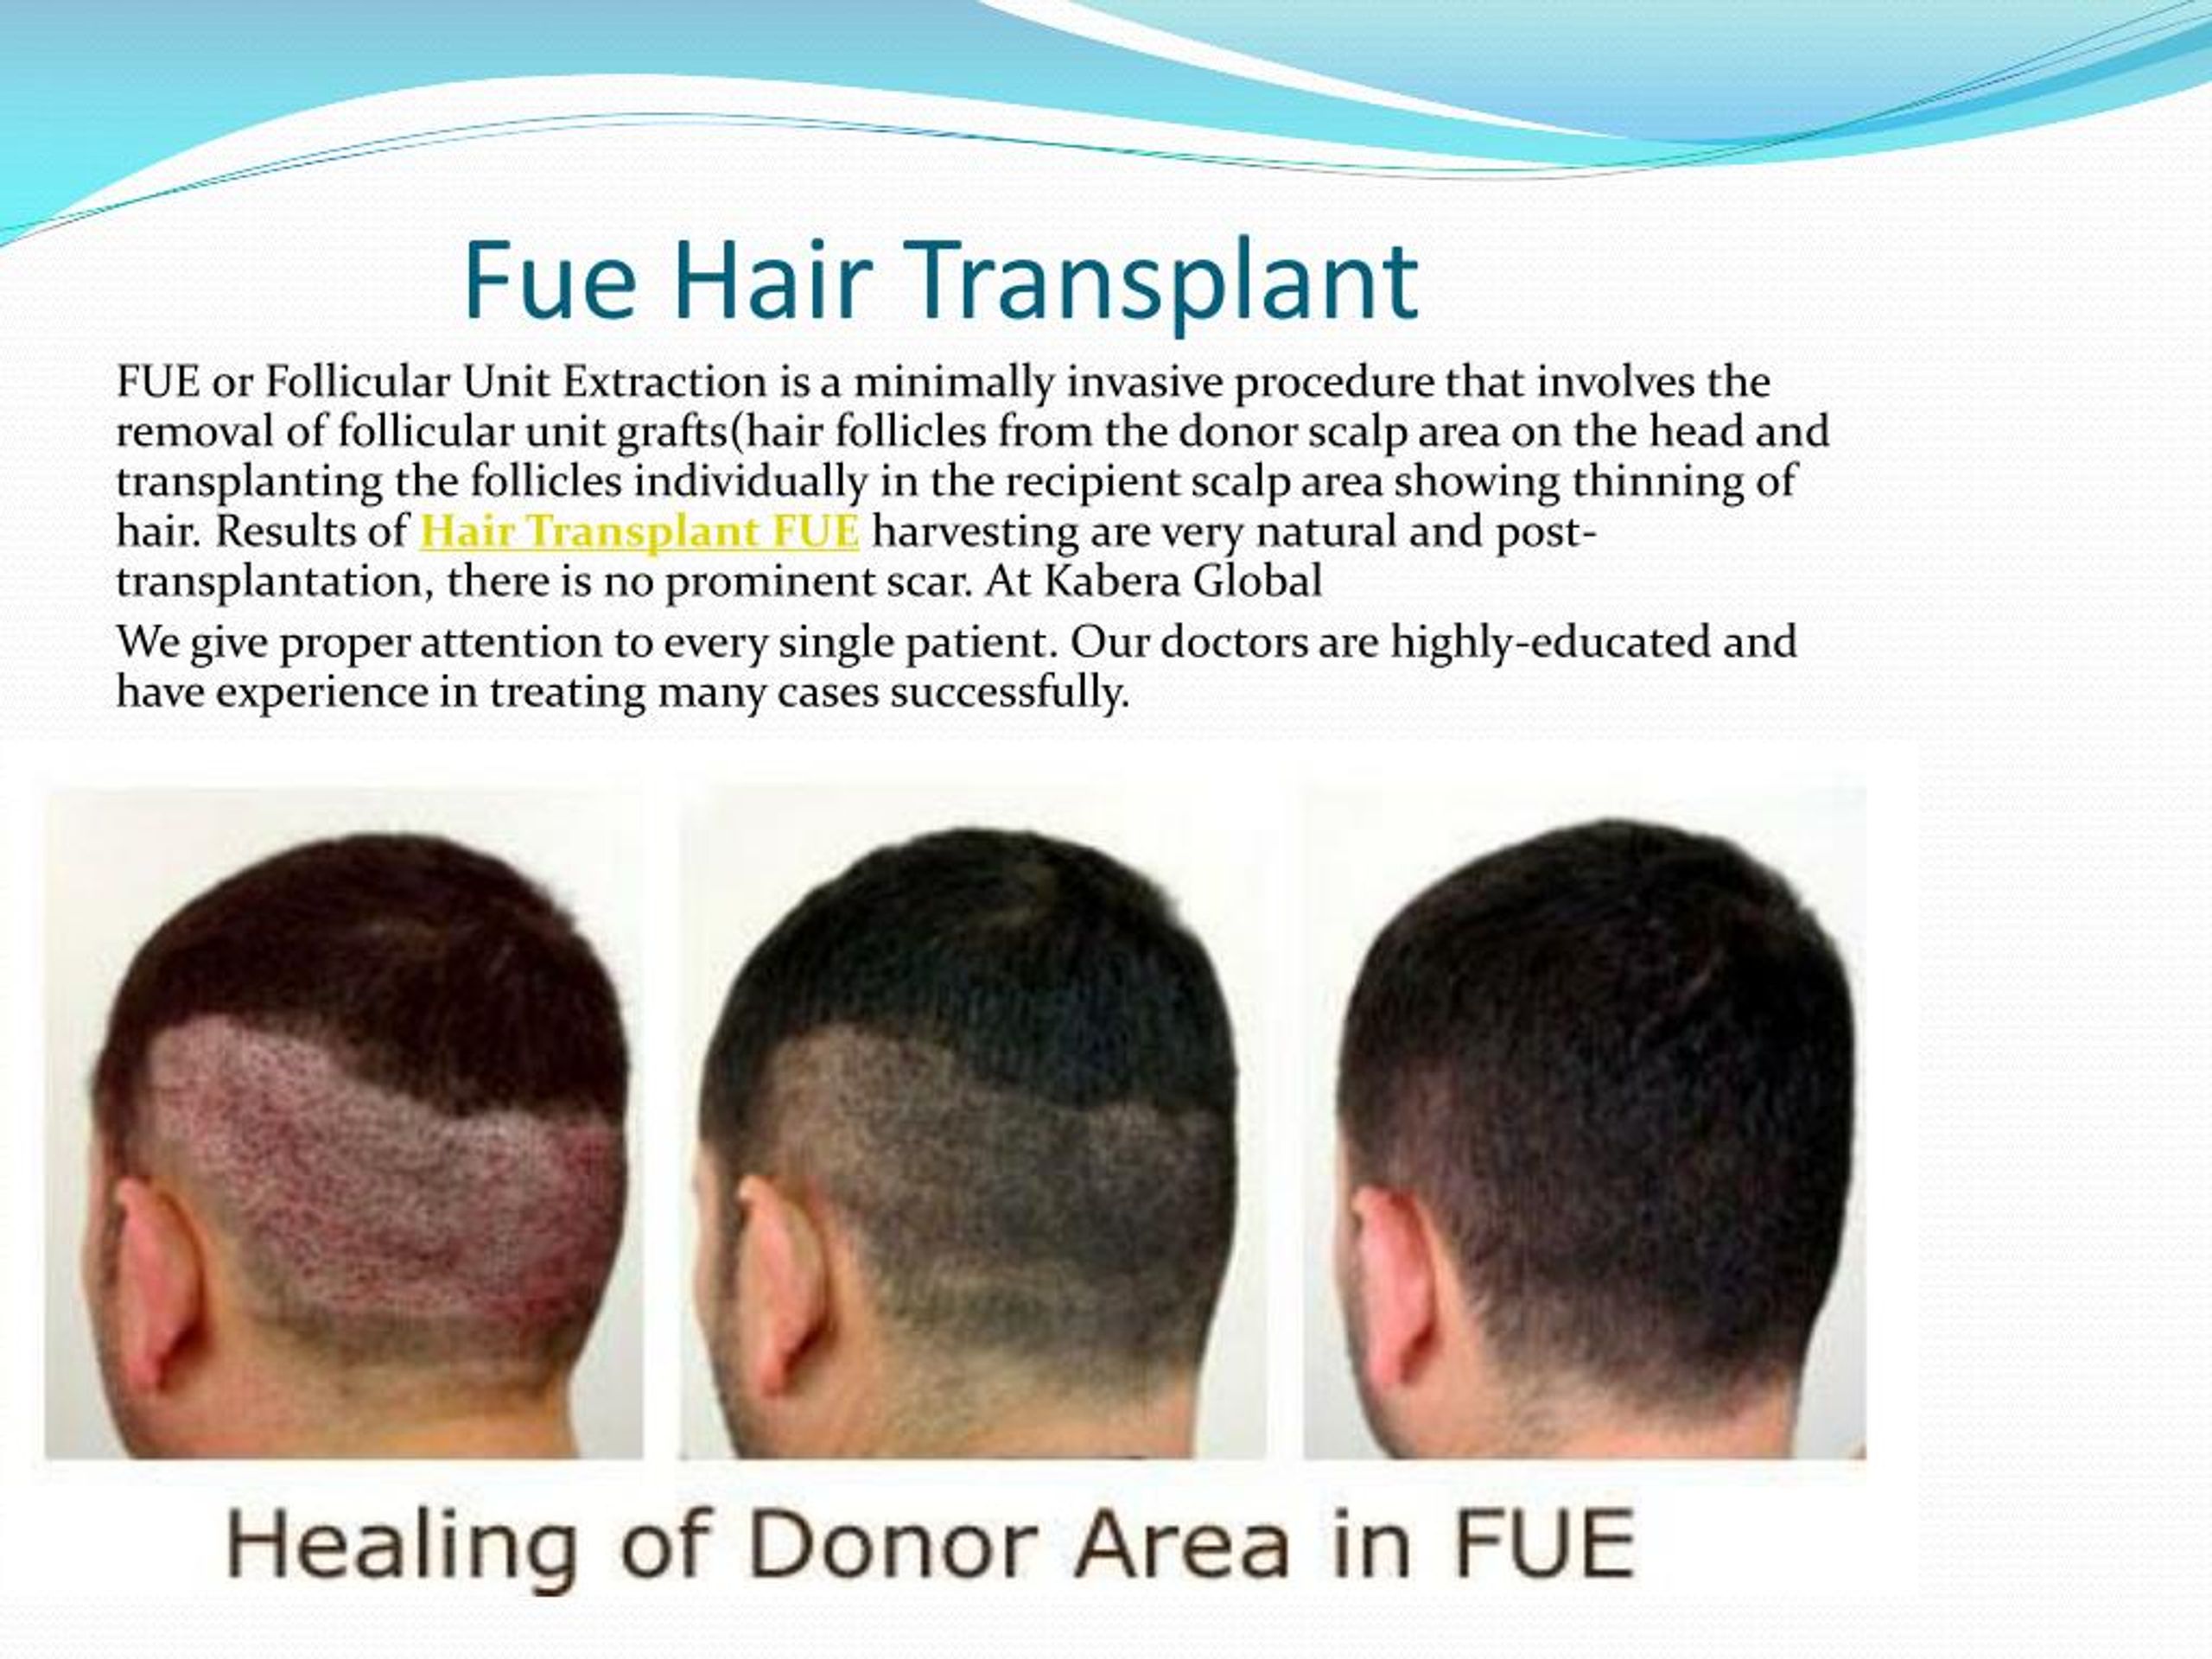 PPT - WELCOME TO KABERA GLOBAL Hair Transplant in Delhi PowerPoint  Presentation - ID:7655944